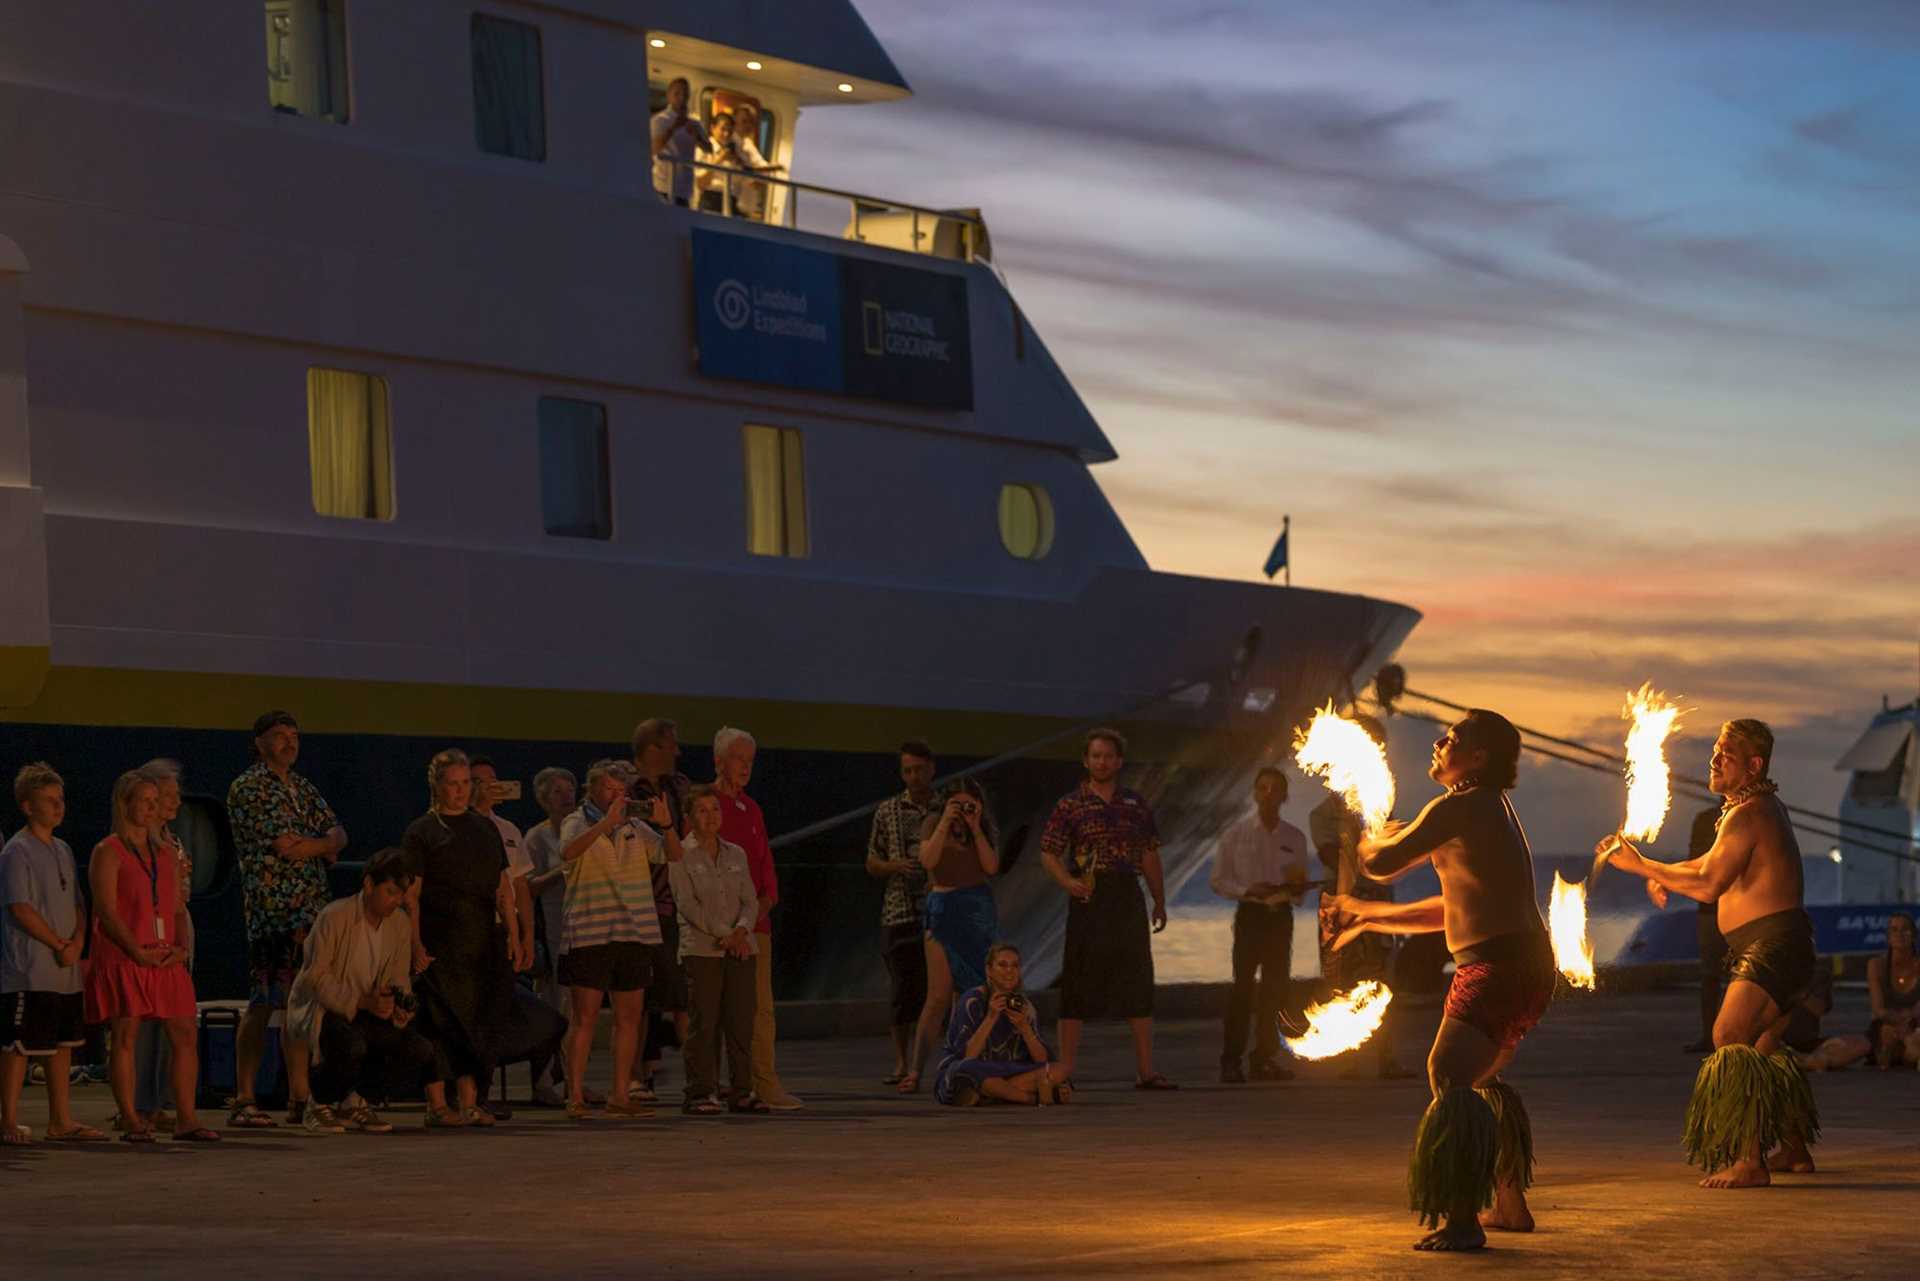 fire dancers perform with National Geographic Orion in the background